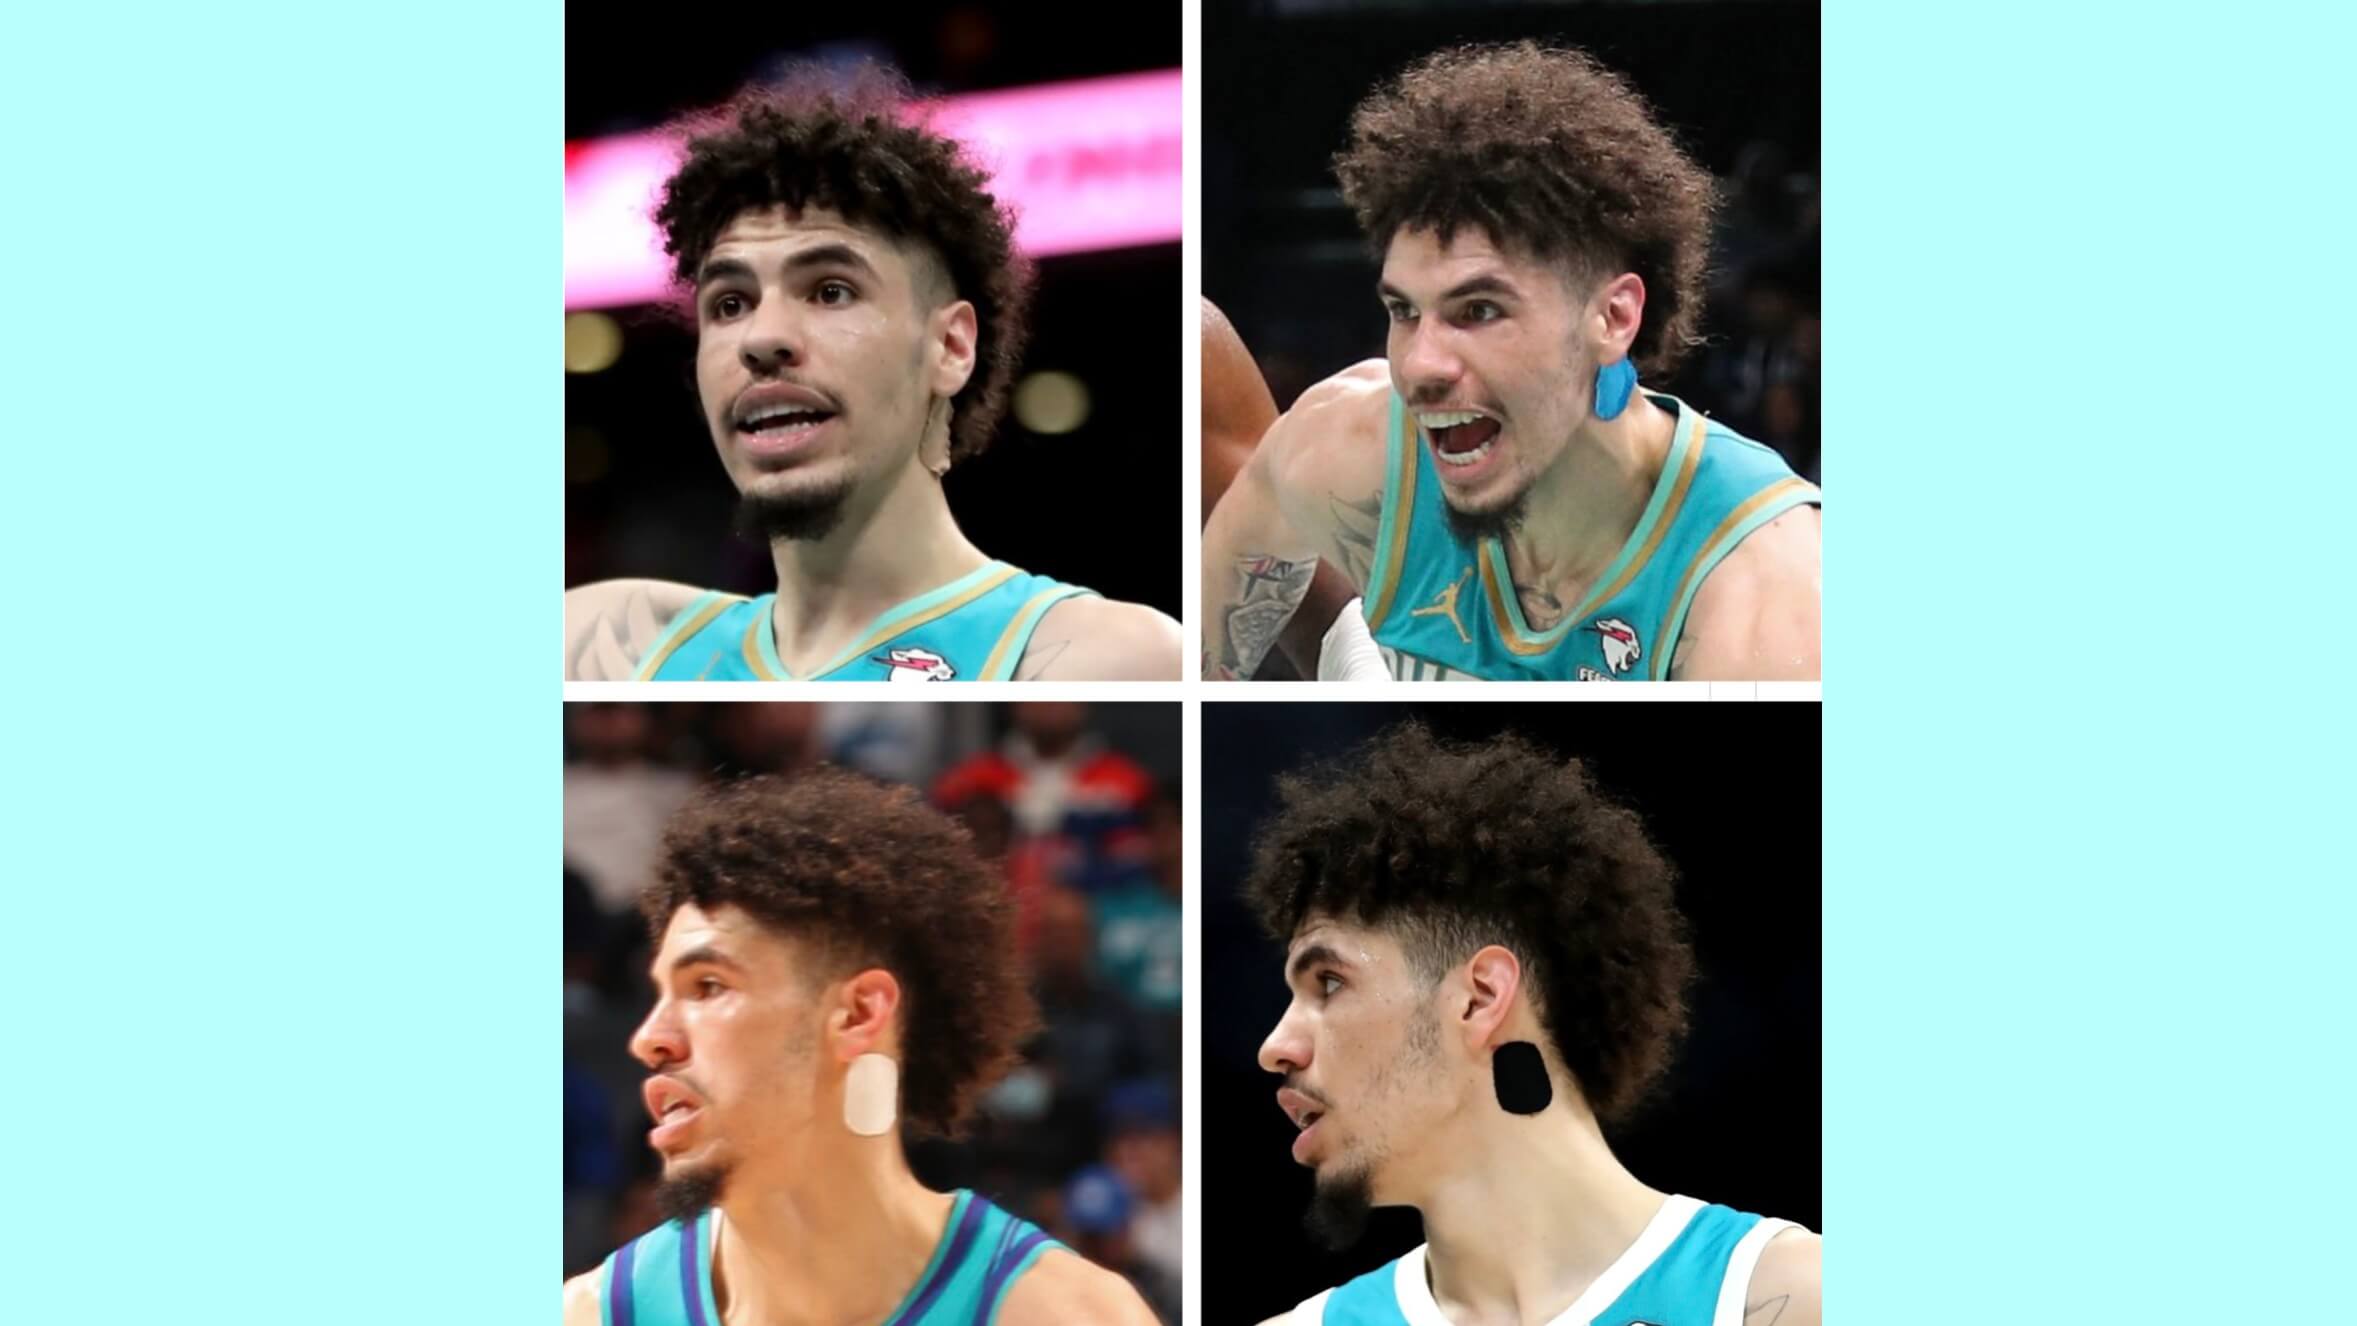 LaMelo Ball Forced To Cover Neck Tattoo, Violates NBA Rules